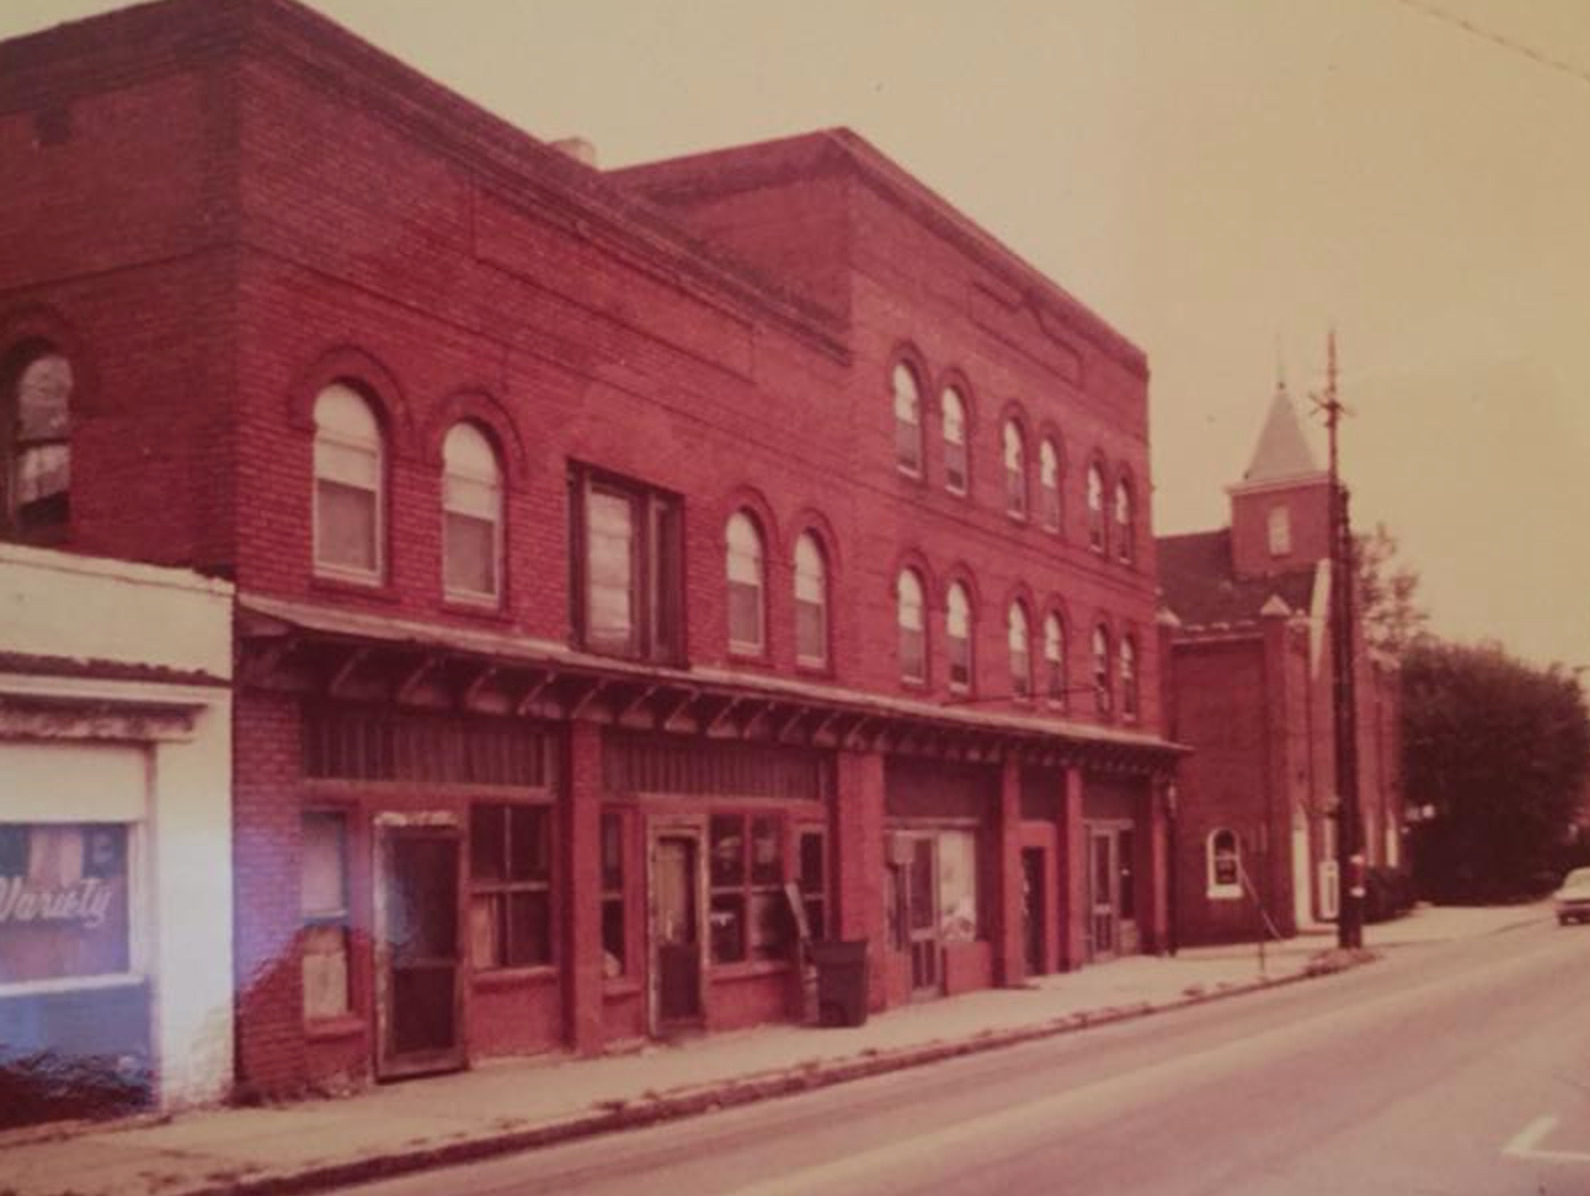 A historic image of the Kilby Hotel and arcade building in High Point, NC.